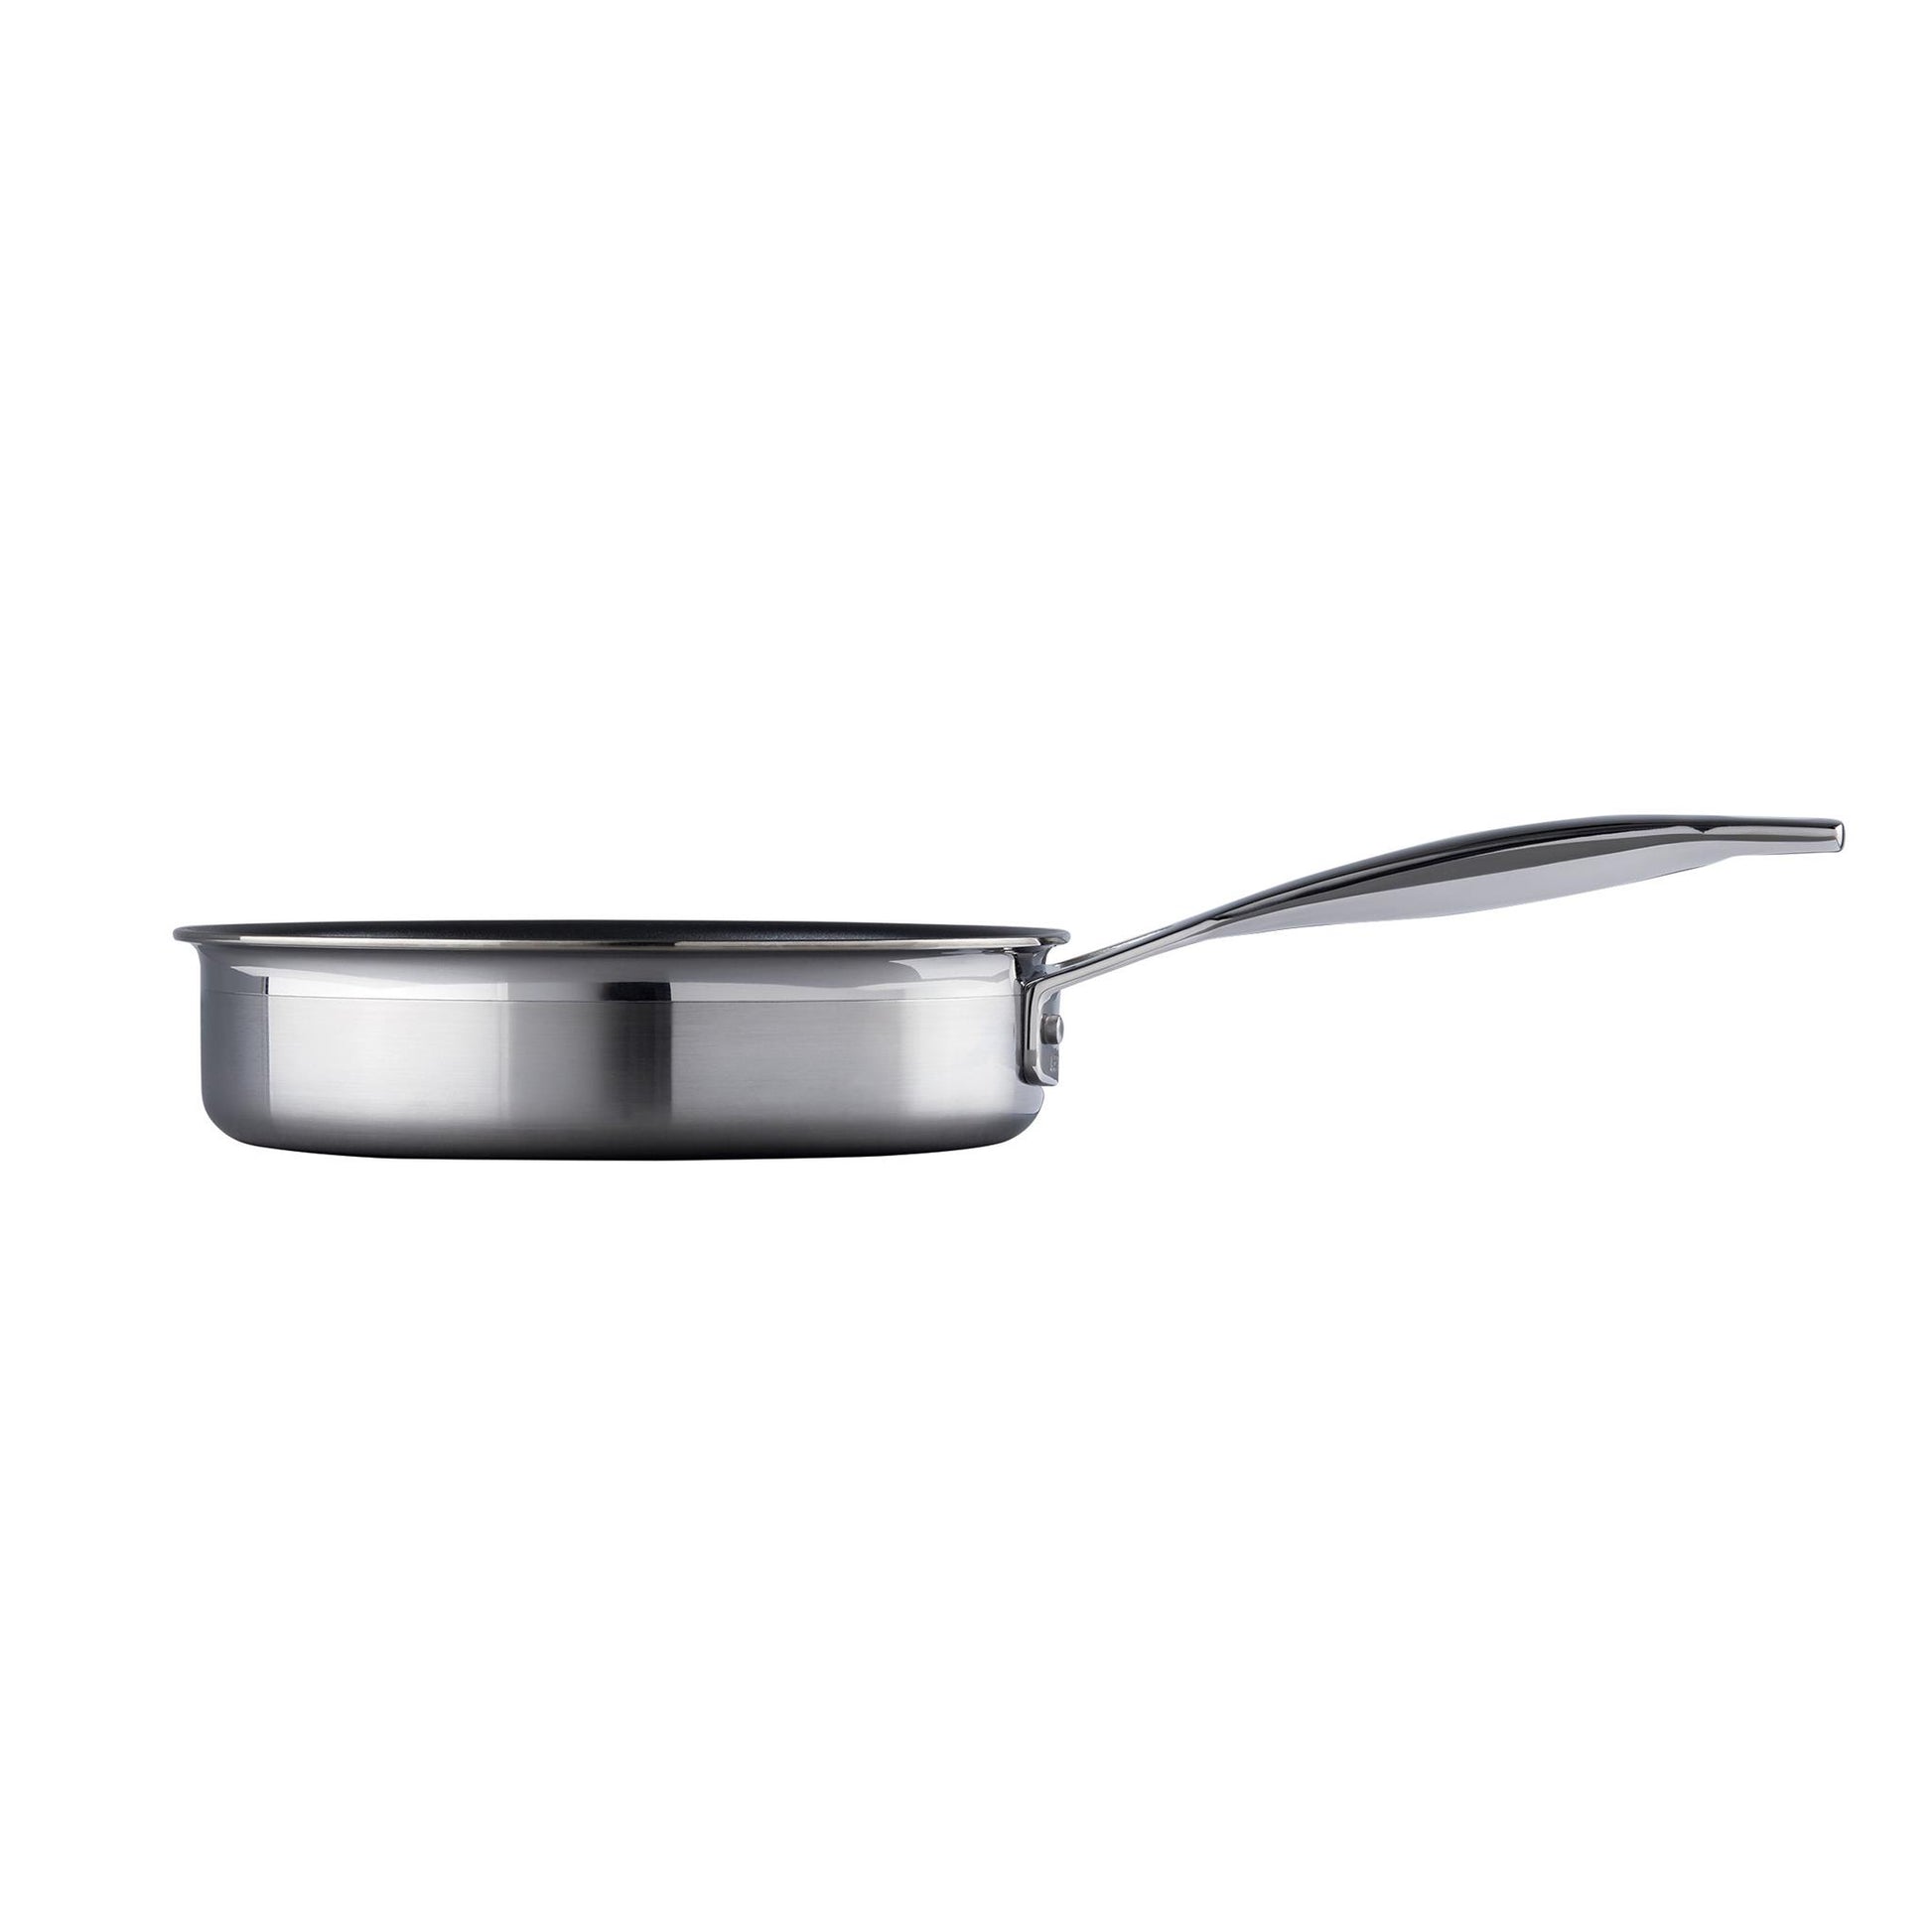 A side view of the Le Creuset saute pan with stainless steel exterior and handle and black non stick lining